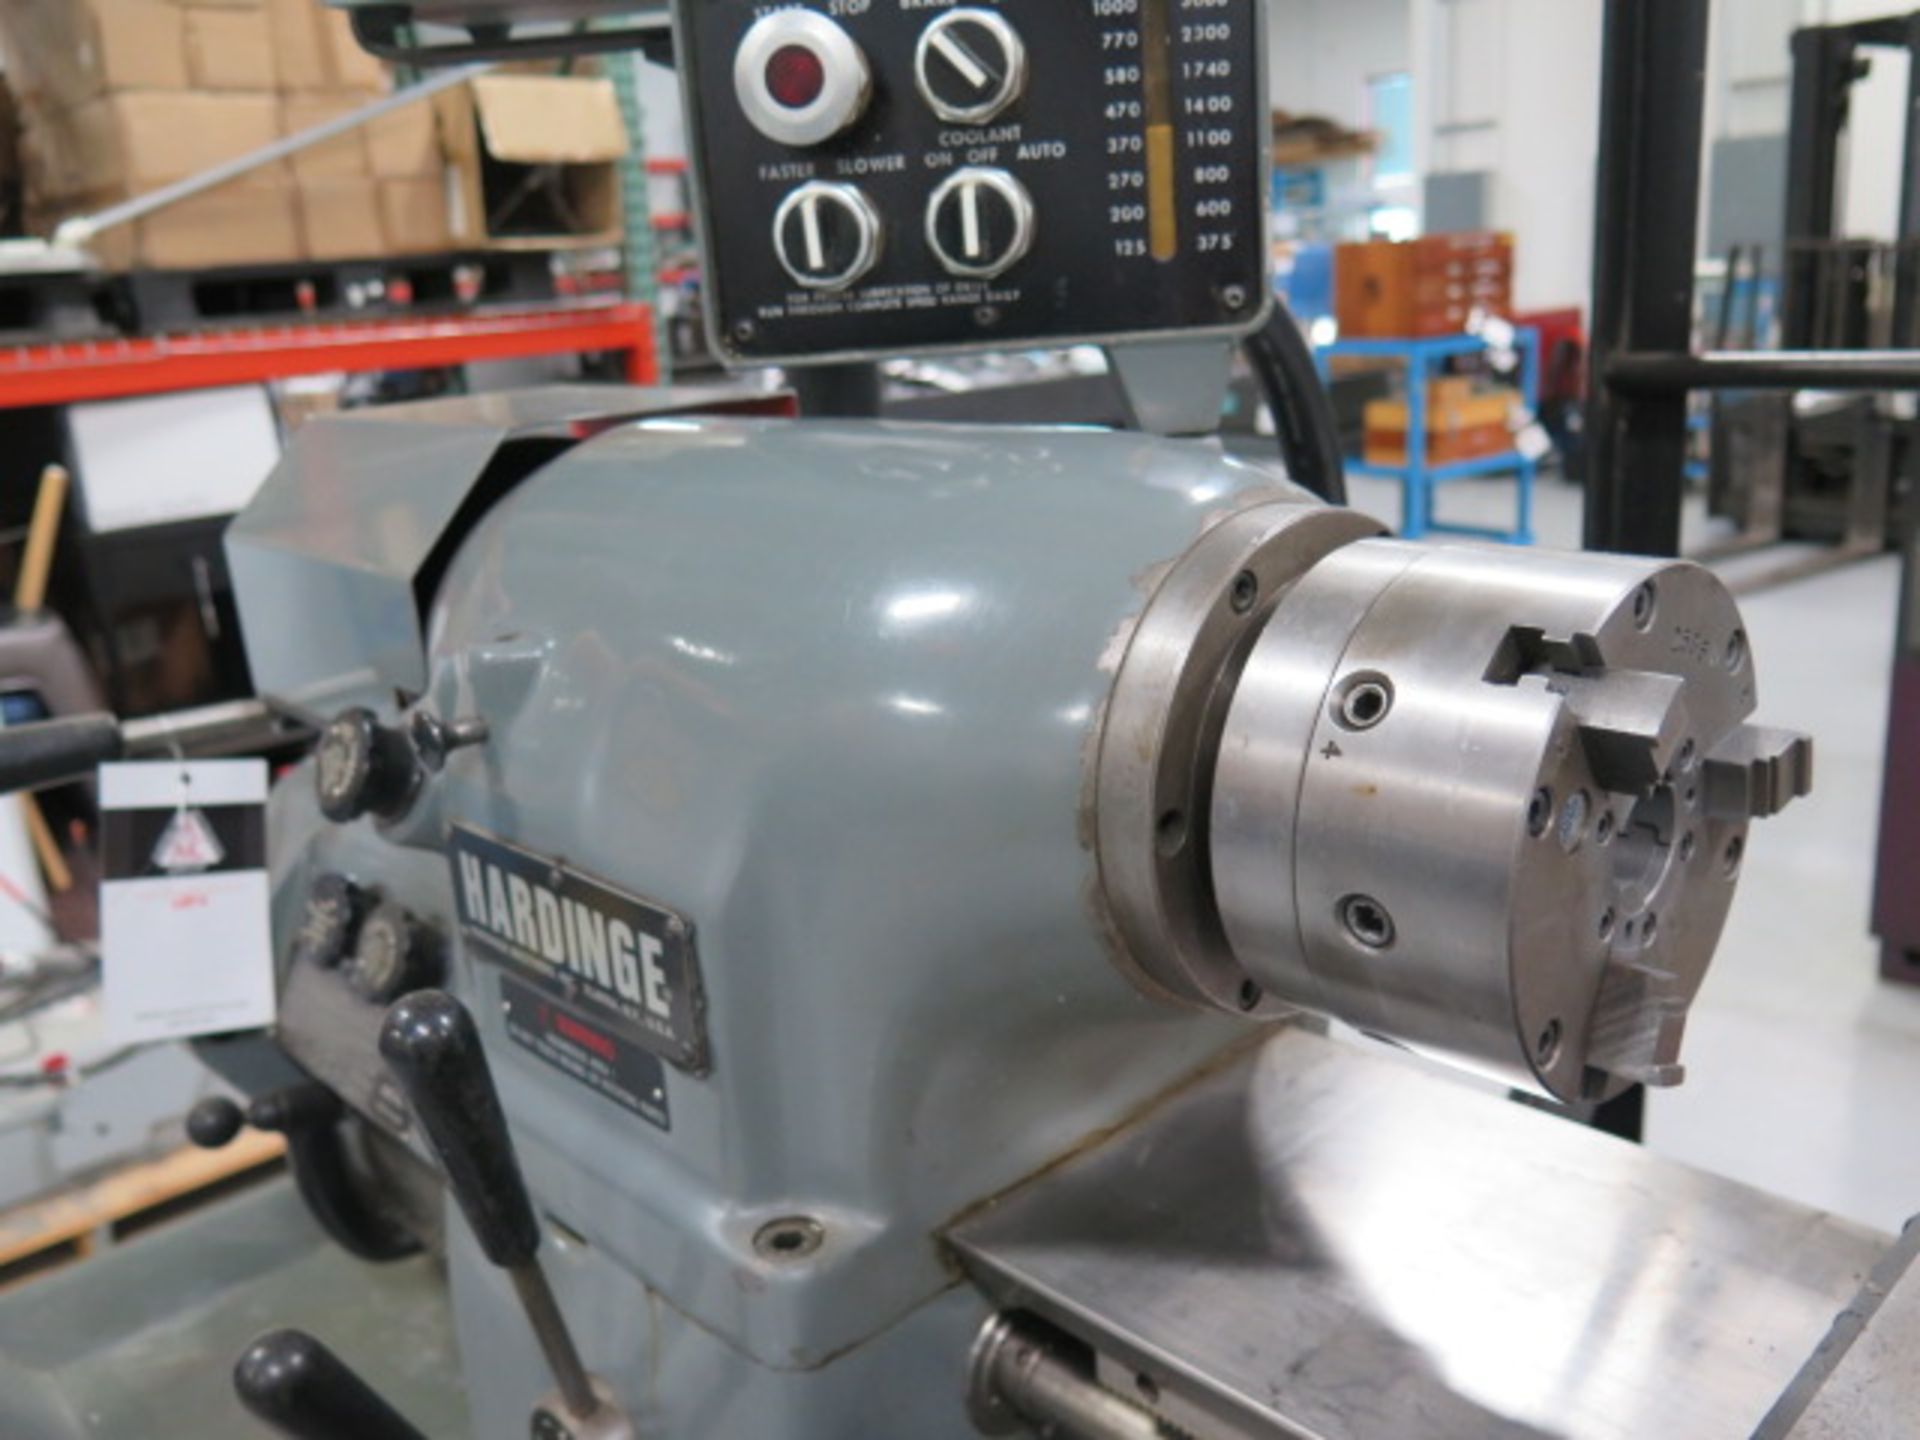 Hardinge HLV-H Wide-Bed Tool Room Lathe s/n HLV-H-14876-T w/ Acu-Rite Master-TP Prog DRO, SOLD AS IS - Image 8 of 21